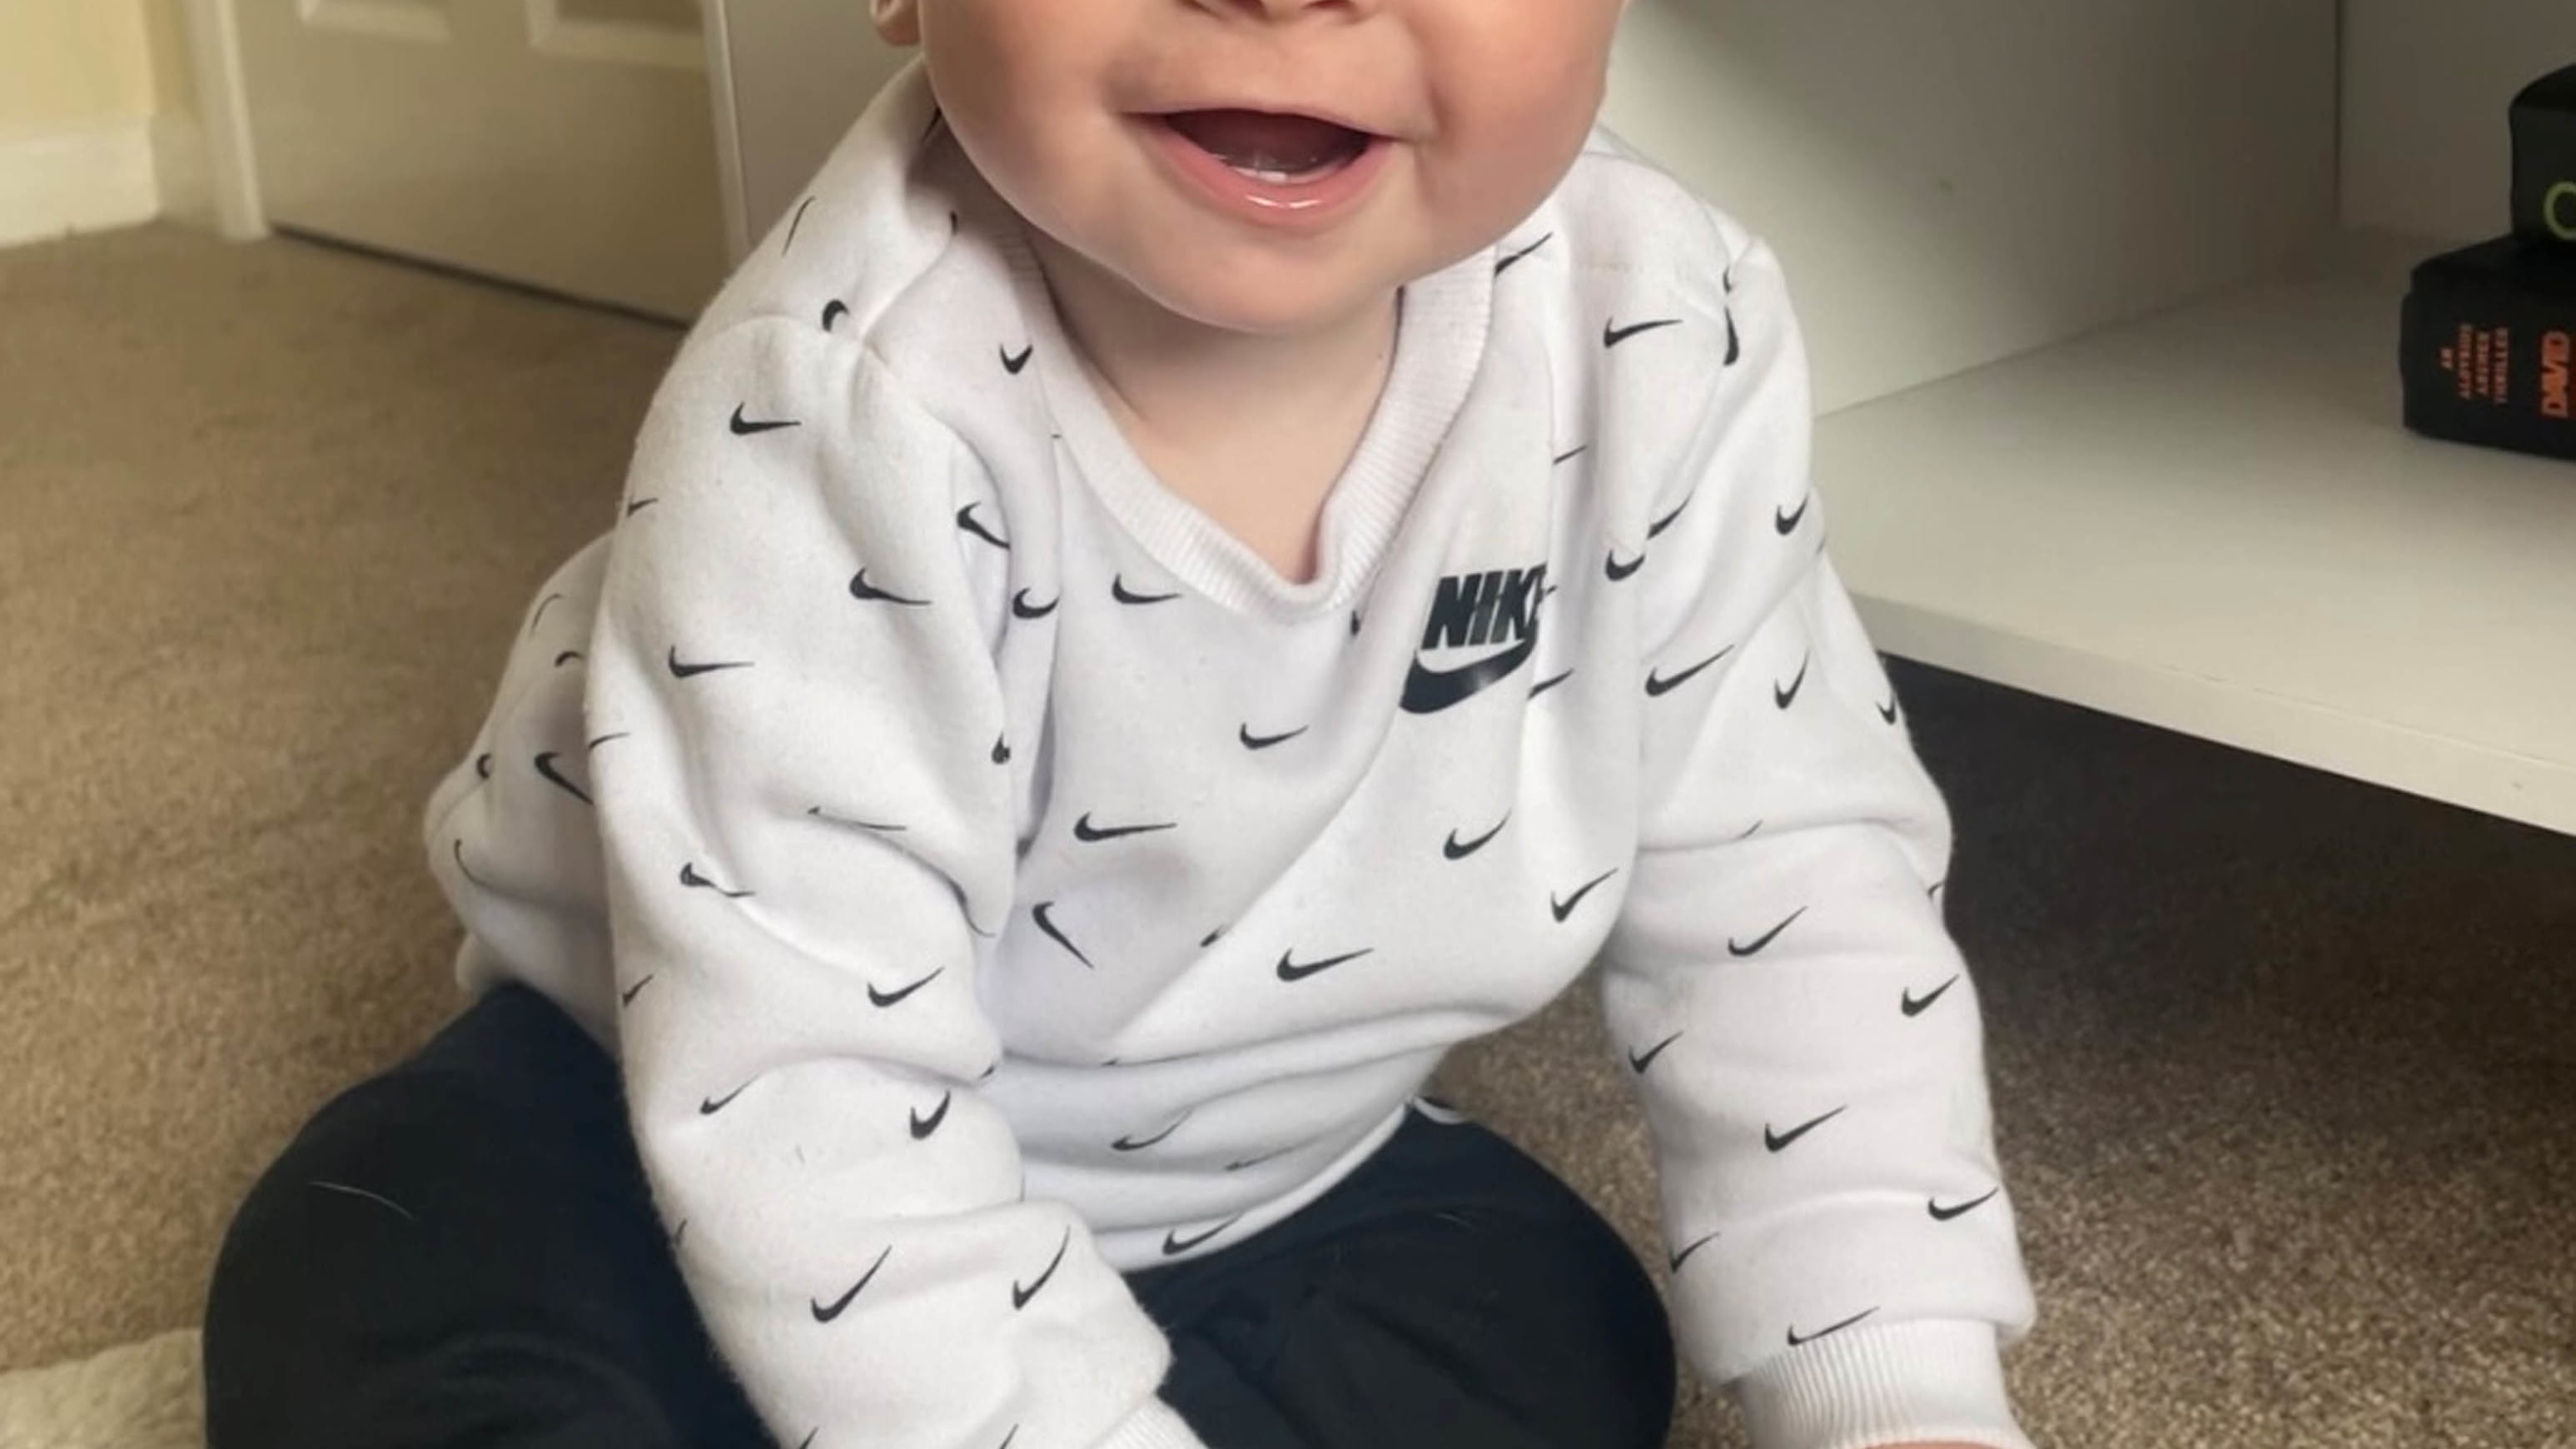 Darryl Anderson has admitted causing the deaths by dangerous driving of eight-month-old Zackary Blades and his aunt, Karlene Warner, in a crash on the A1 in County Durham